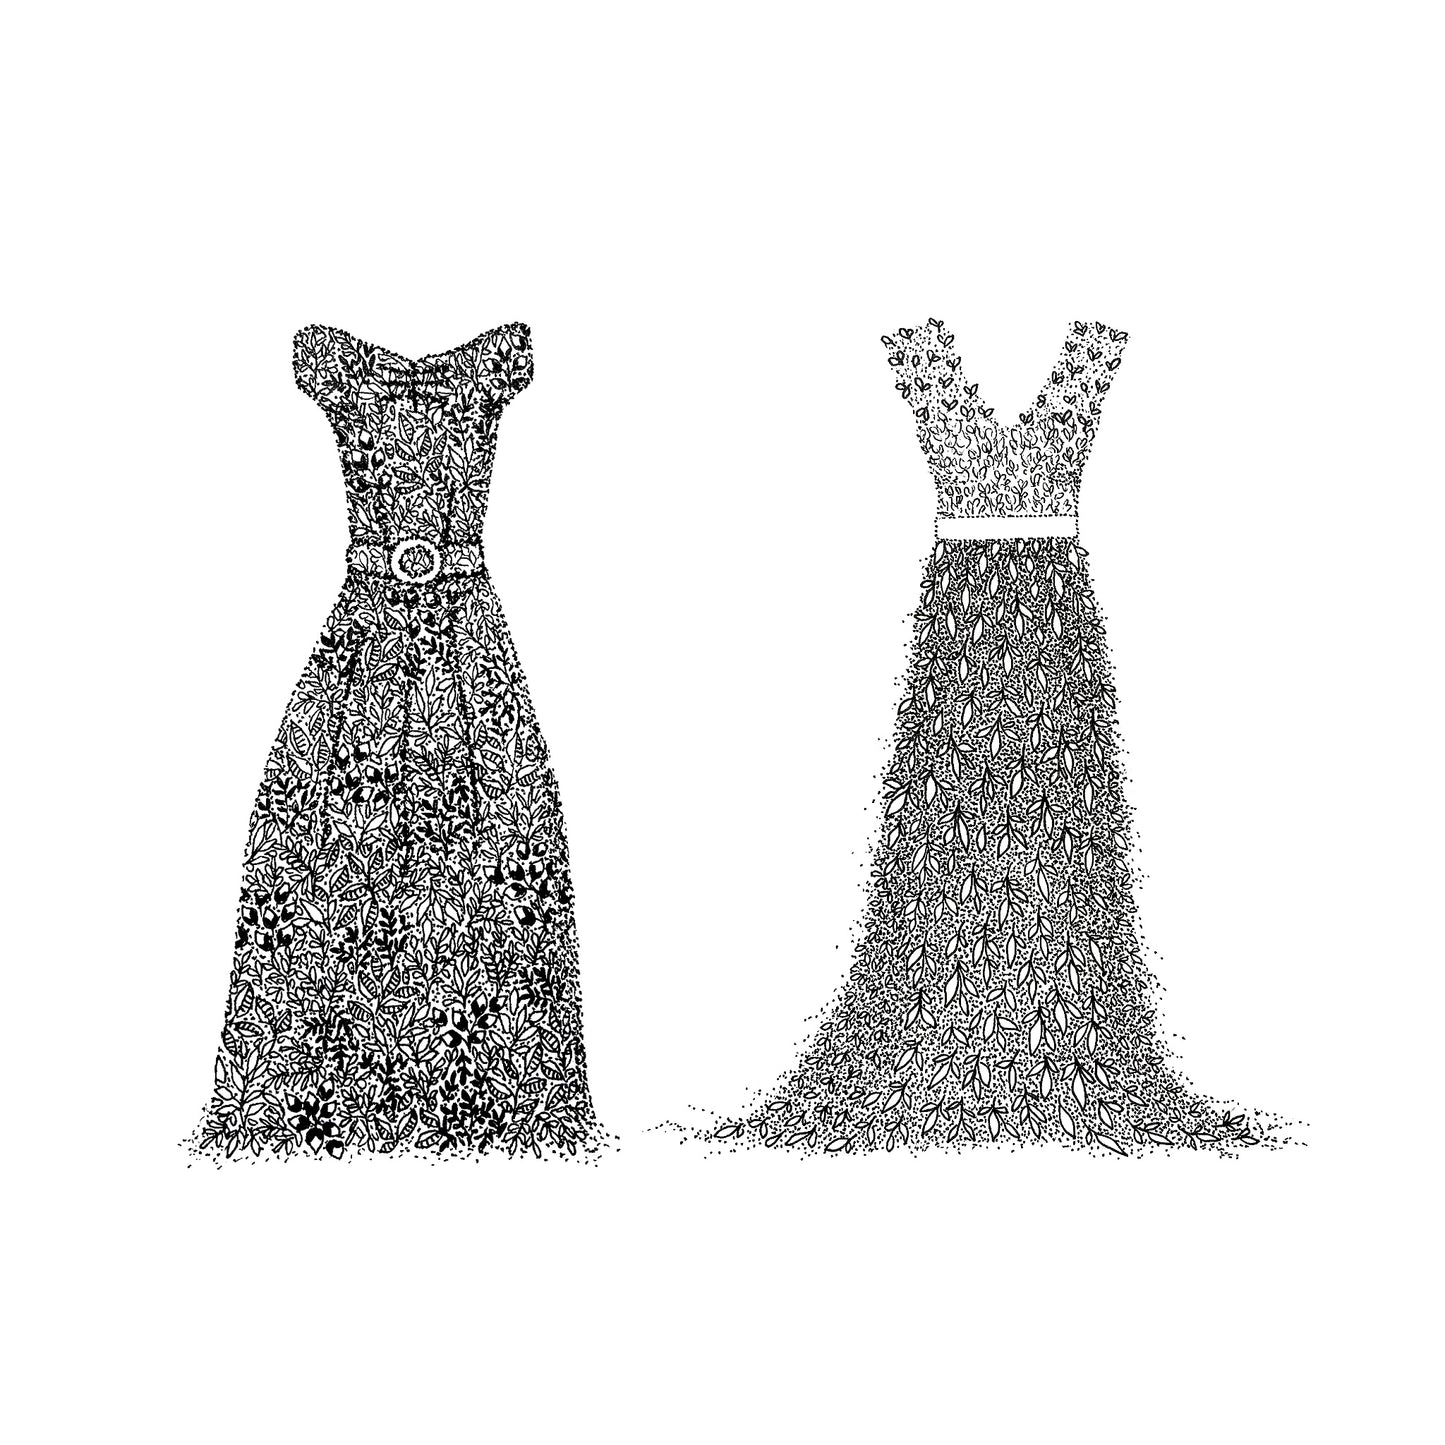 Image shows MRS & MRS card illustration. both titles are portrayed by dresses, the one on the left being a short sleeve dress with belt in the middle and more structure and the one to the right being a floral summer-y vibe dress more flowy. Both dresses are hand drawn using floral drawings. Image entirely black and white. Image is shown on a plain white card to display how looks when purchased. 